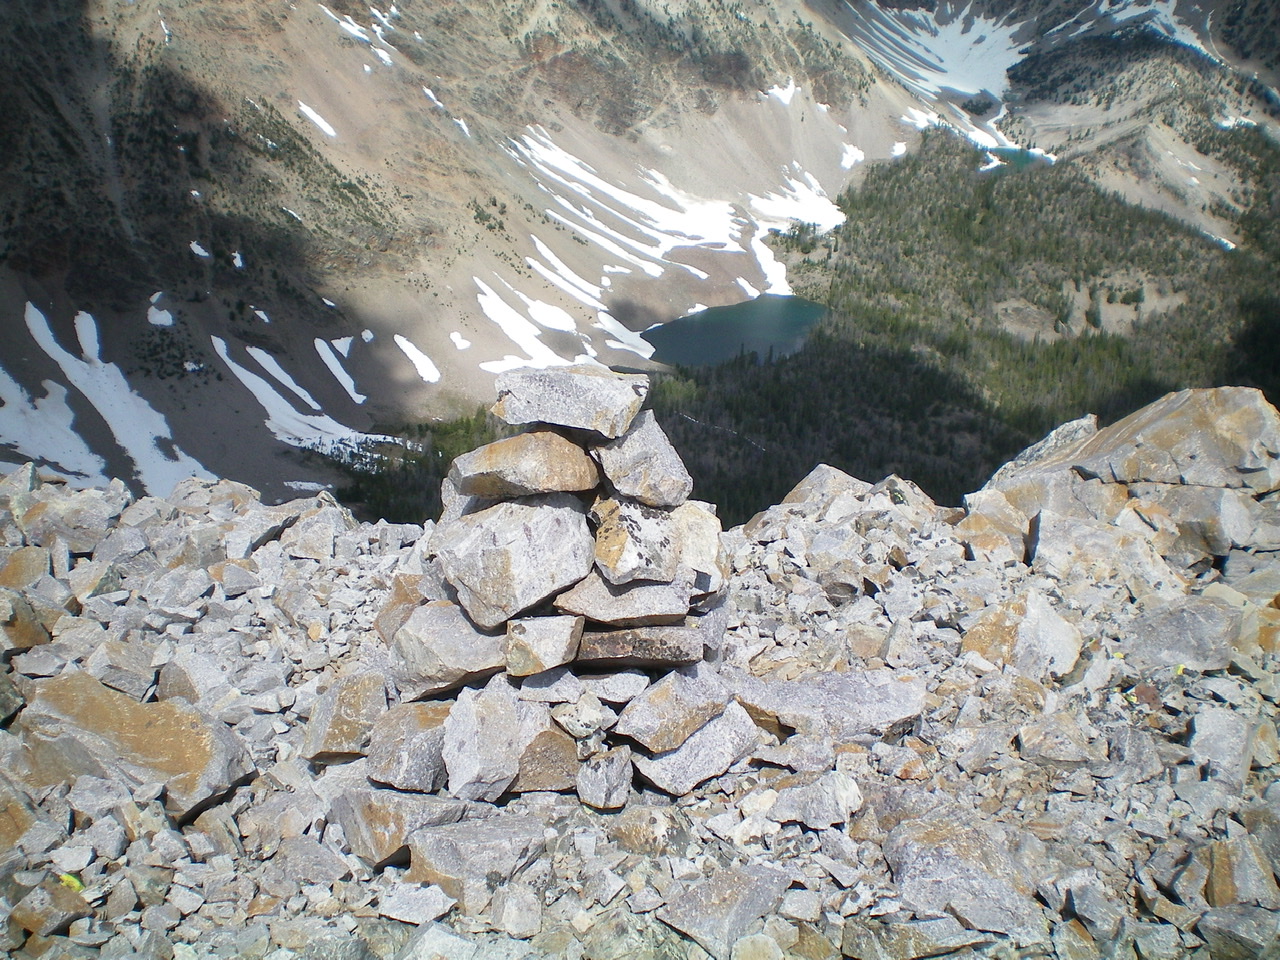 The summit cairn atop Peak 10310 with a beautiful high mountain lake to its northwest. Livingston Douglas Photo 